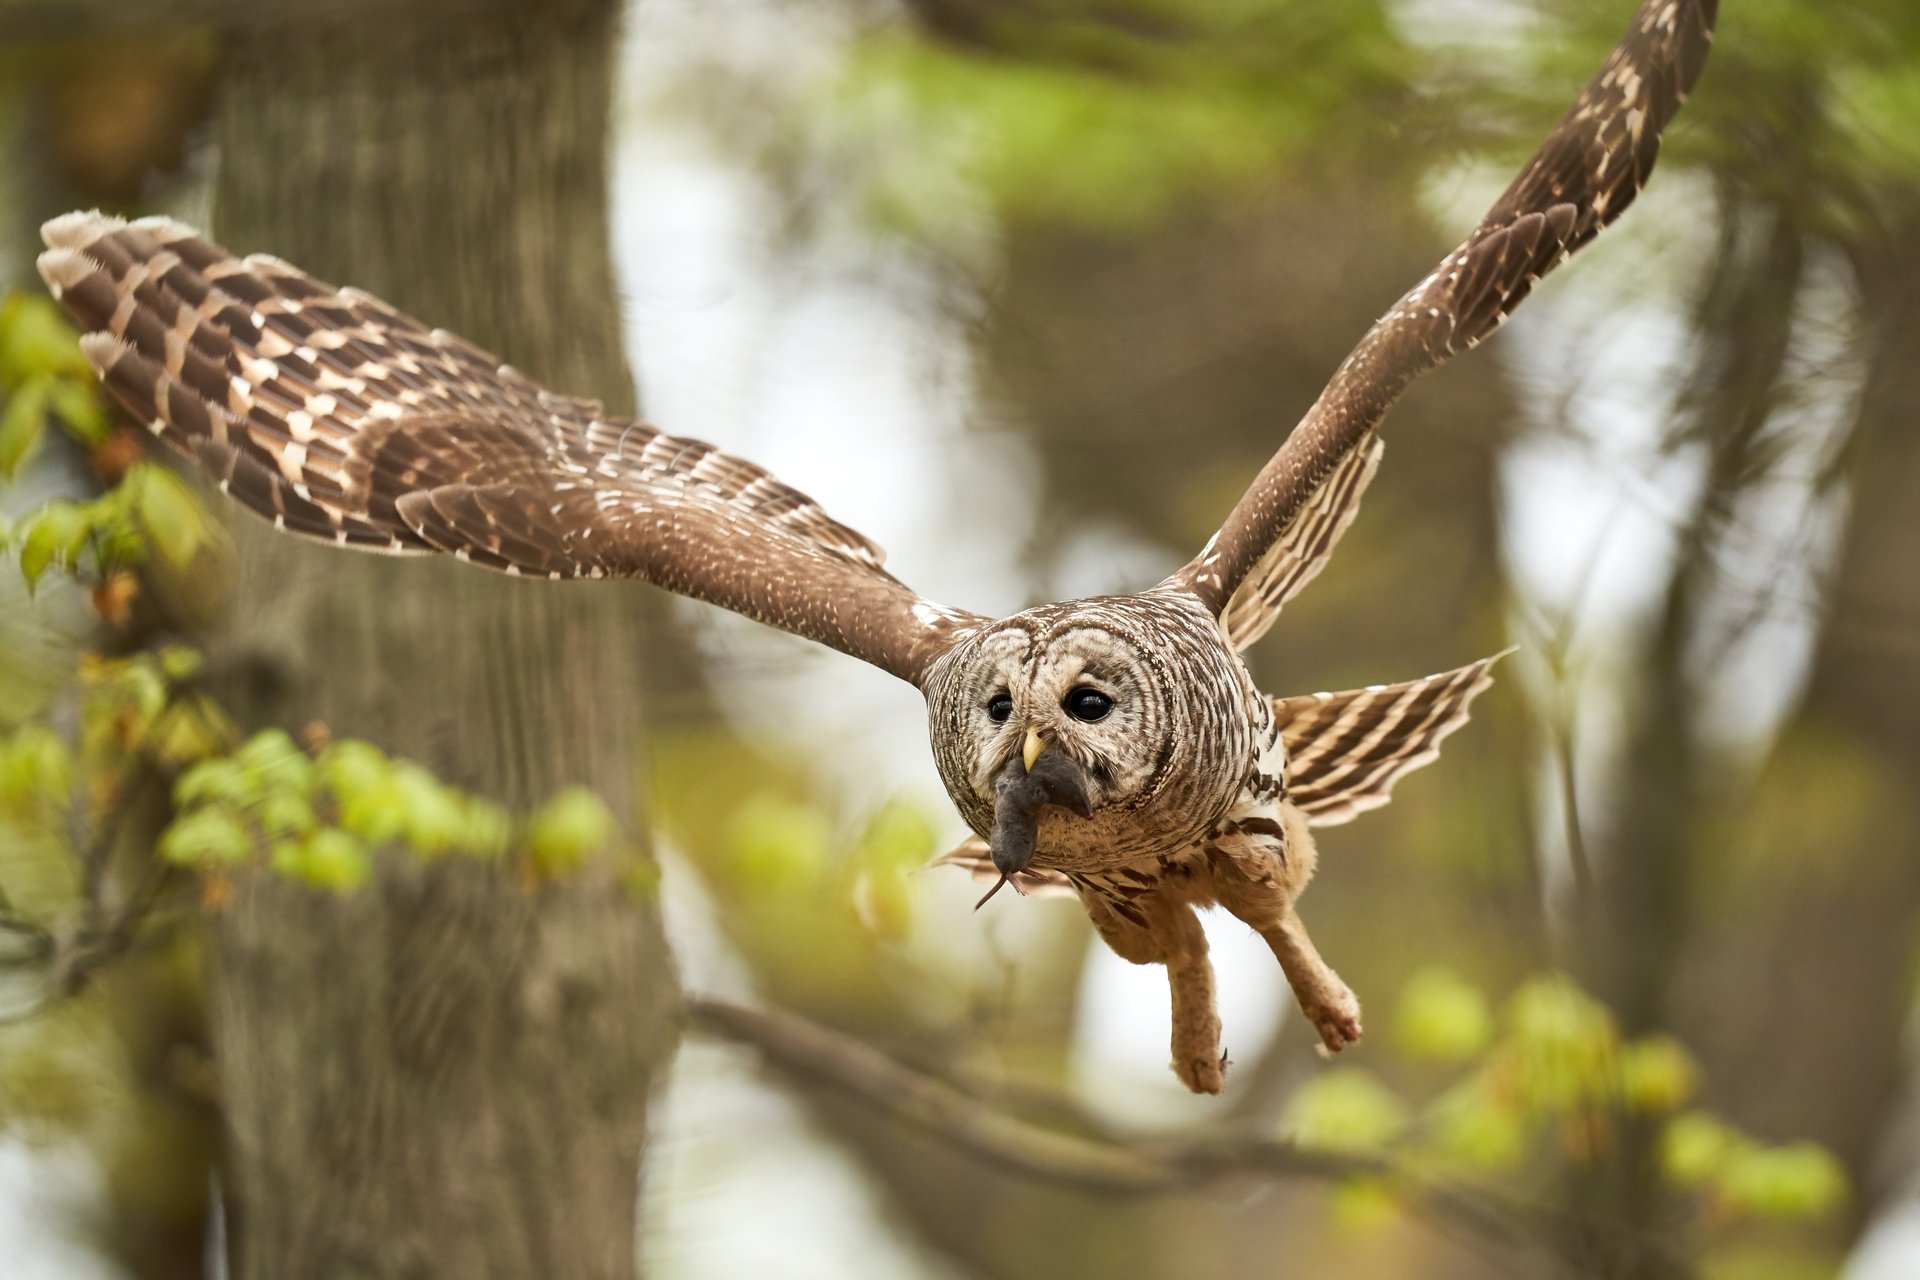 An owl flying through a forest with a mouse in its beak